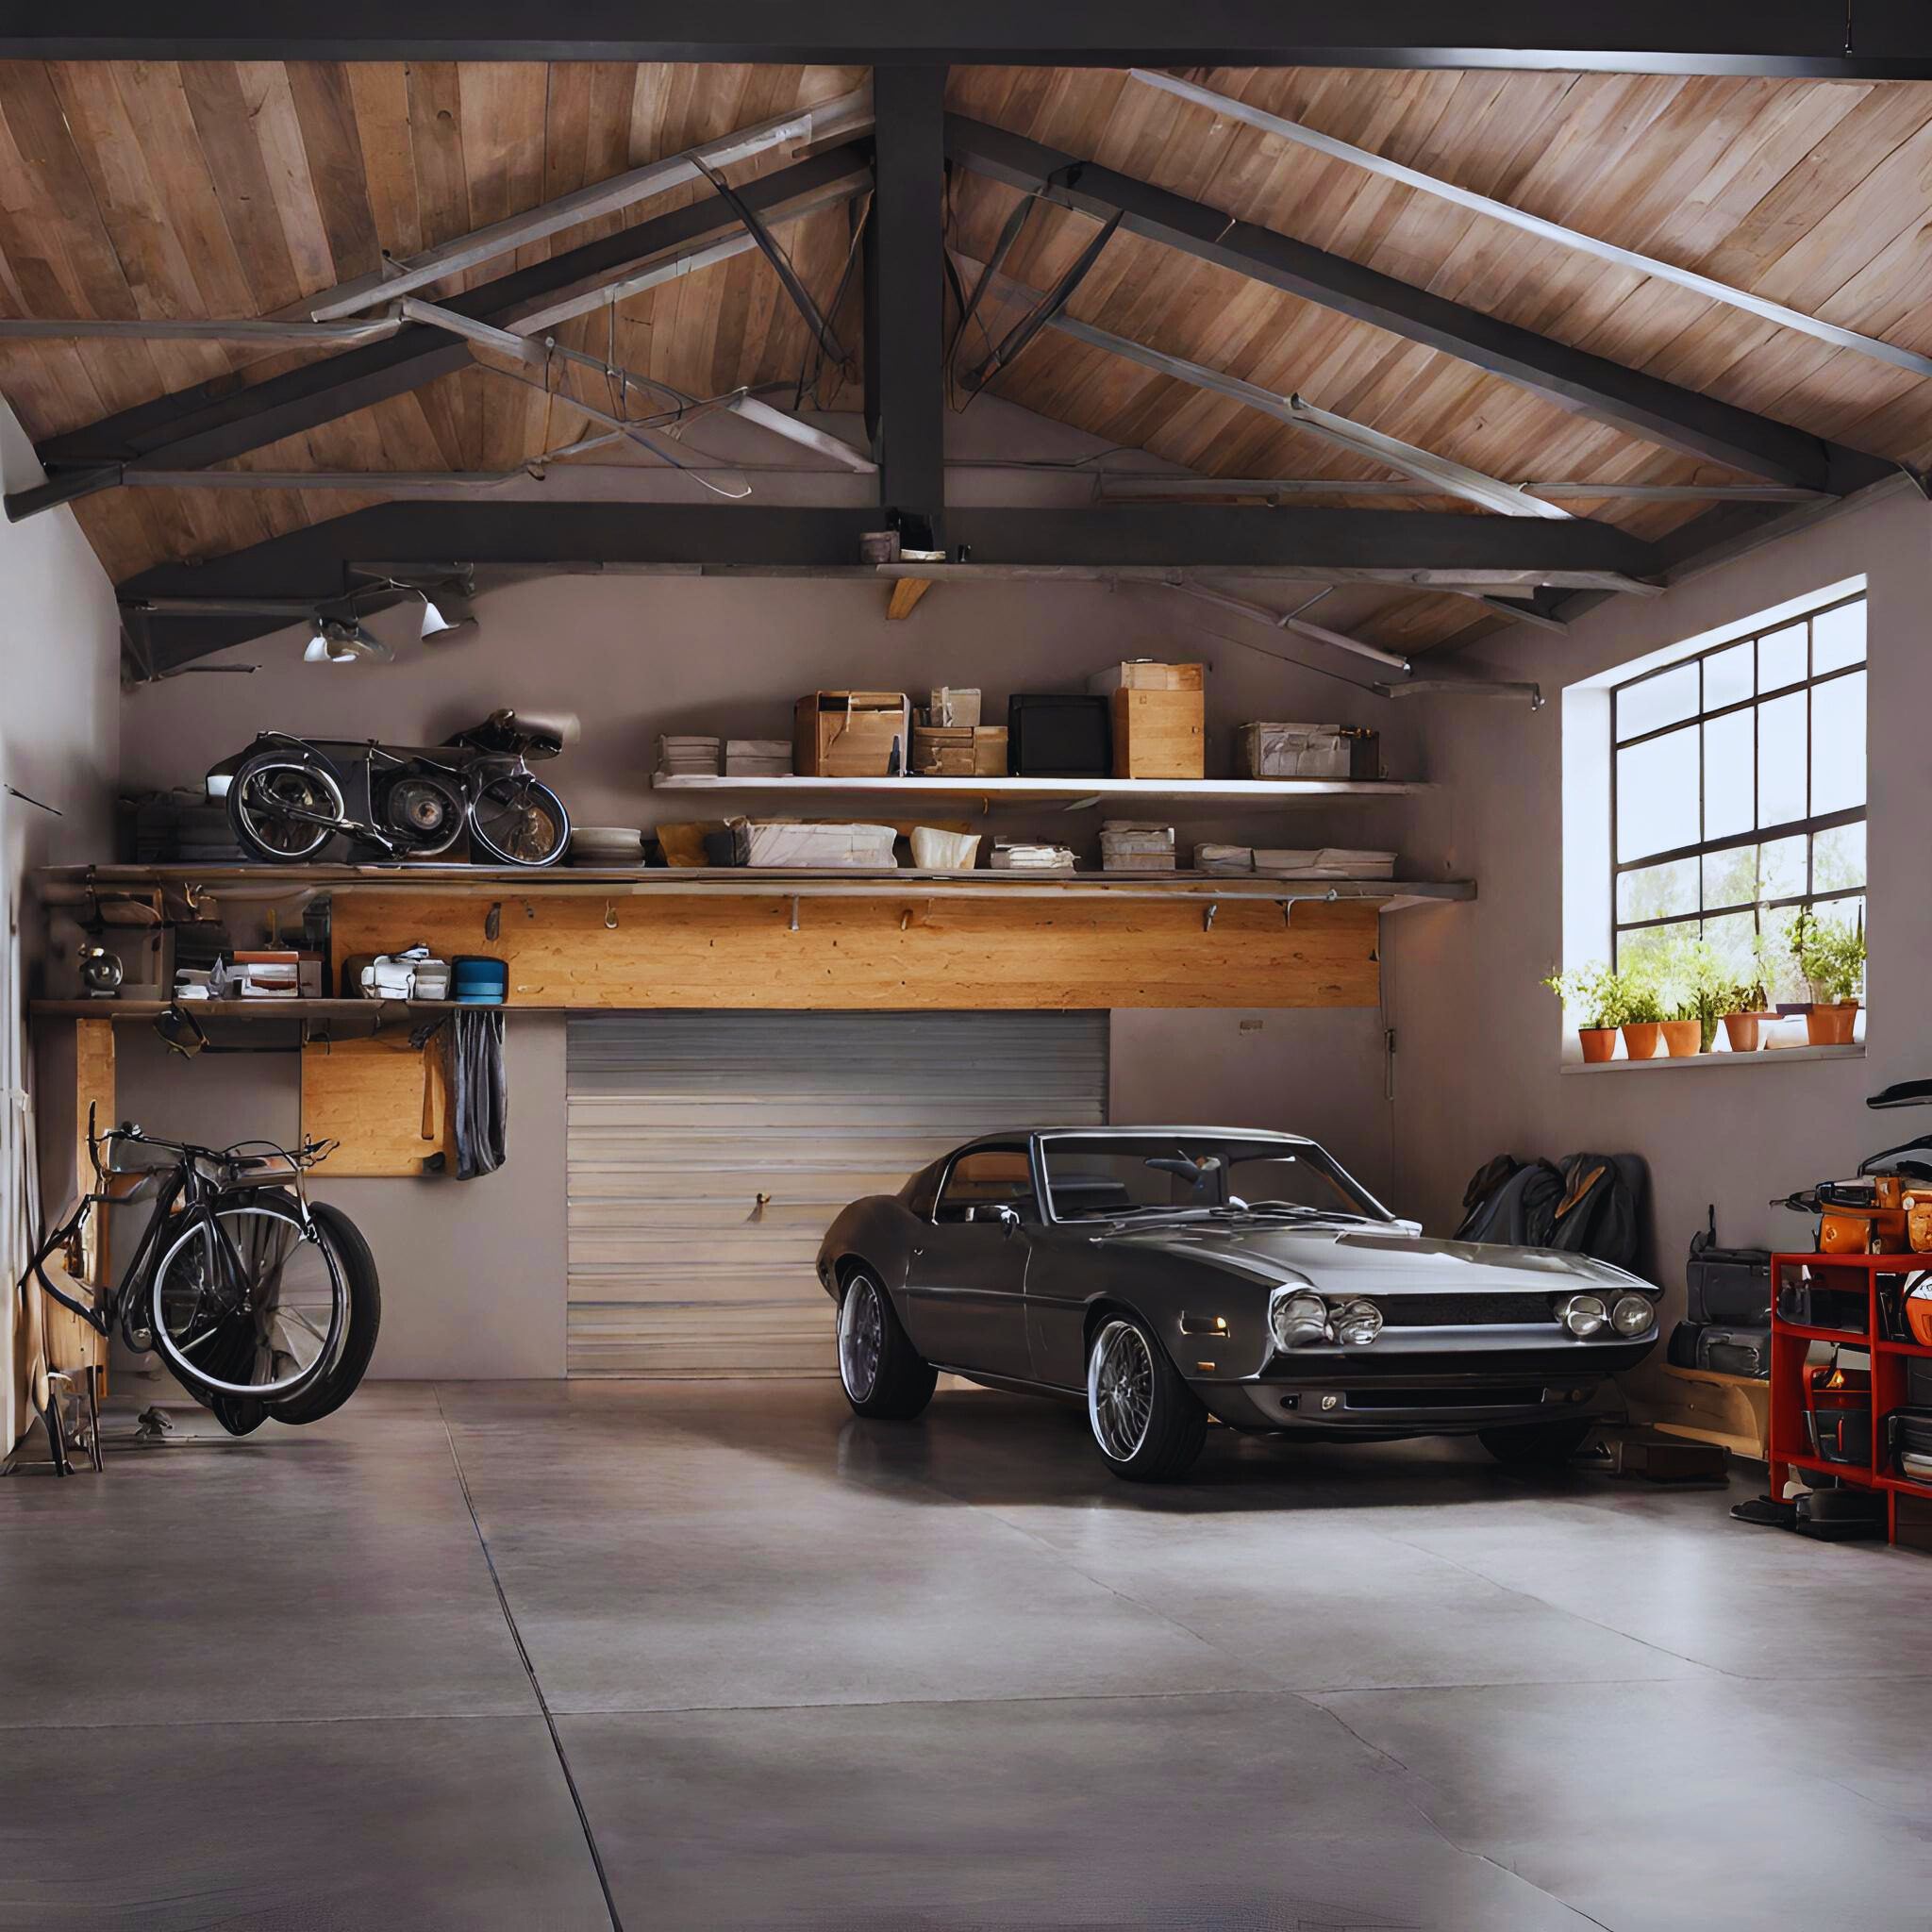 From Clutter to Order: Garage Loft Boarding Solutions